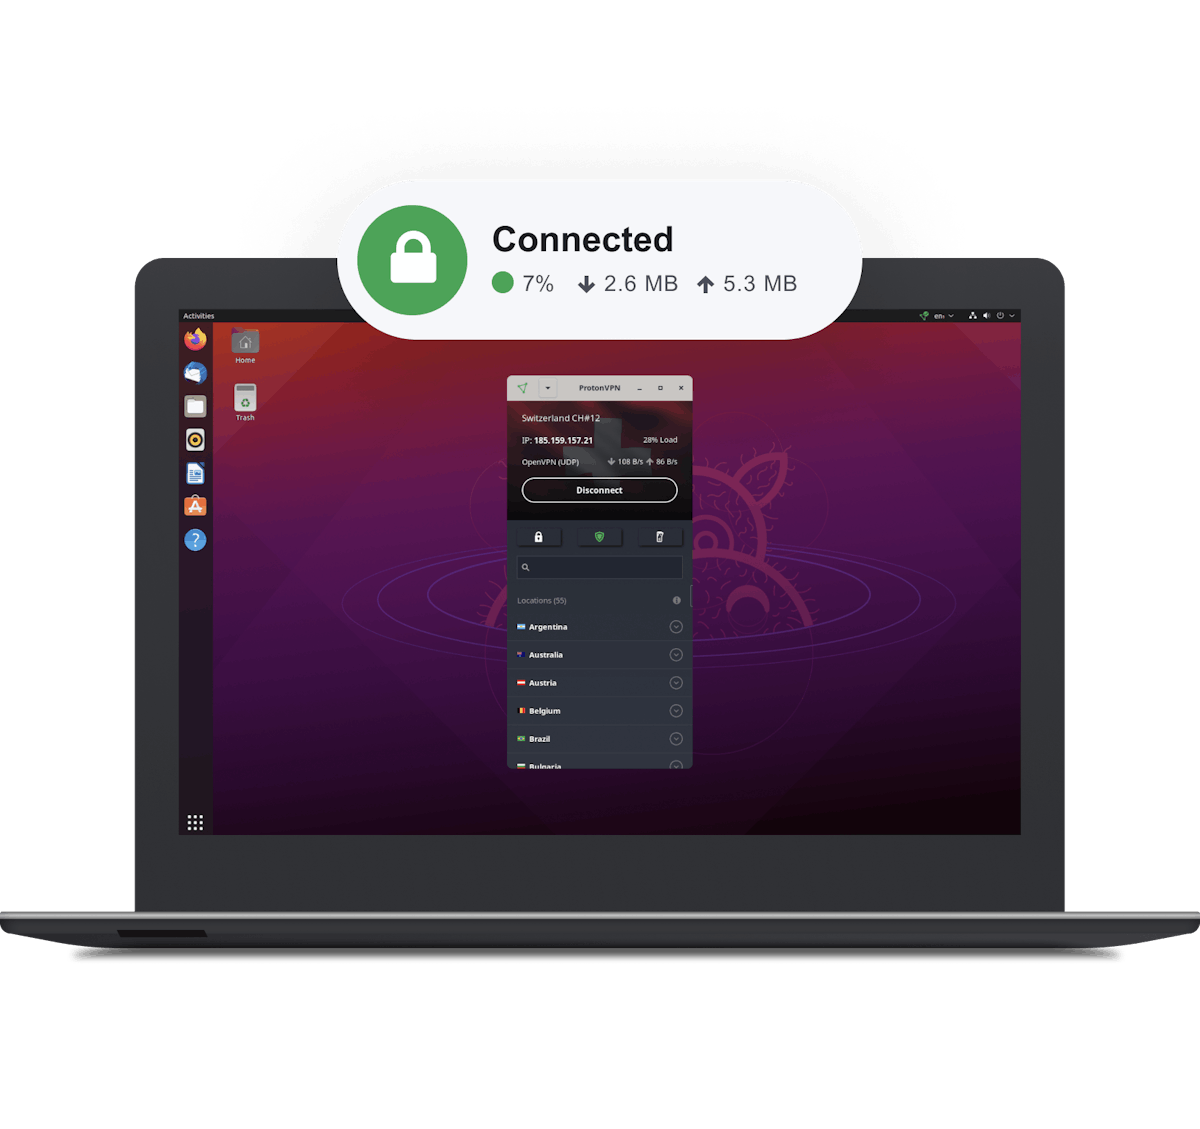 Does Linux have a built-in VPN?